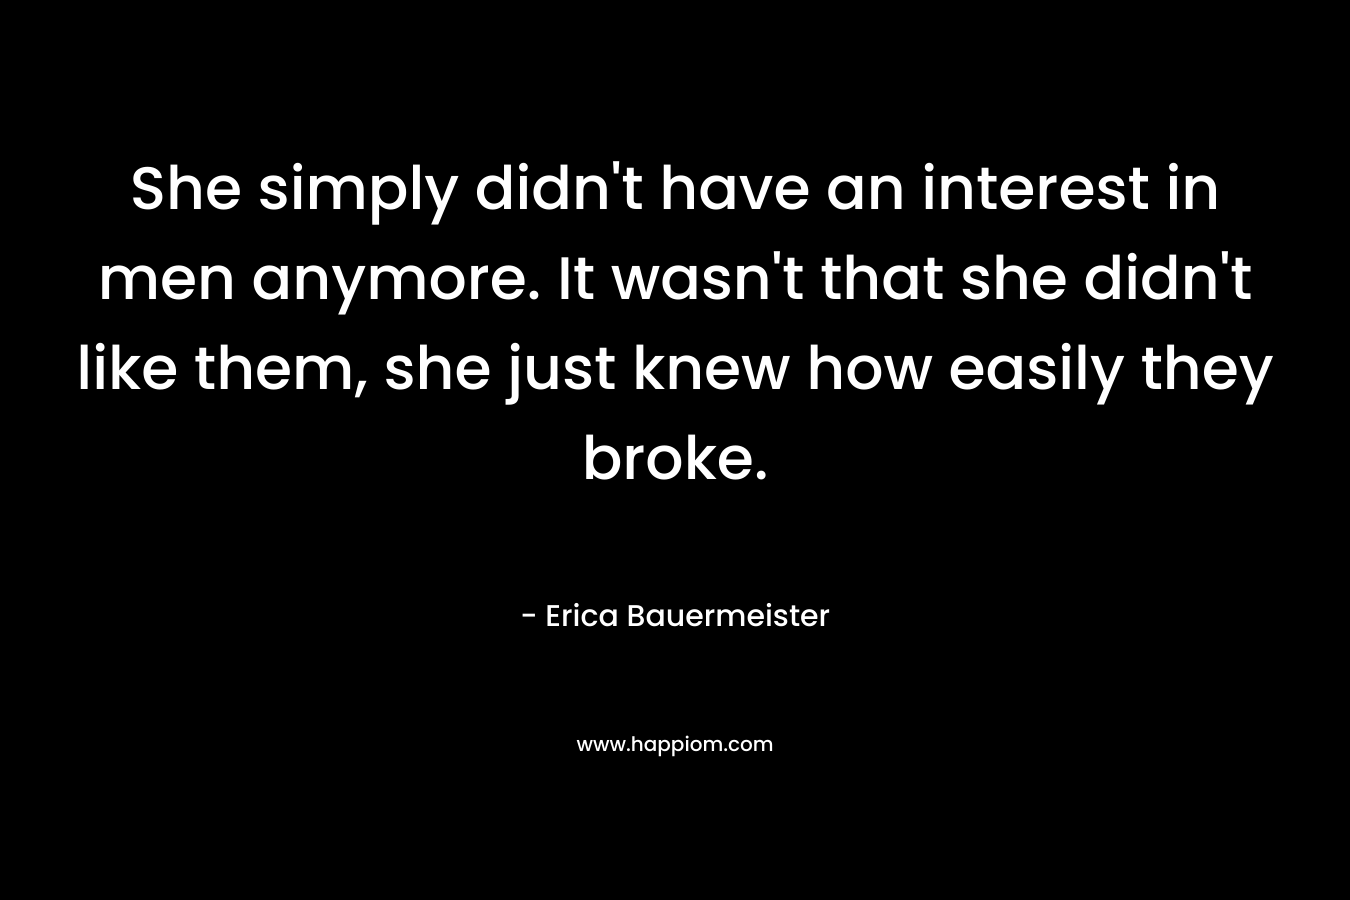 She simply didn't have an interest in men anymore. It wasn't that she didn't like them, she just knew how easily they broke.